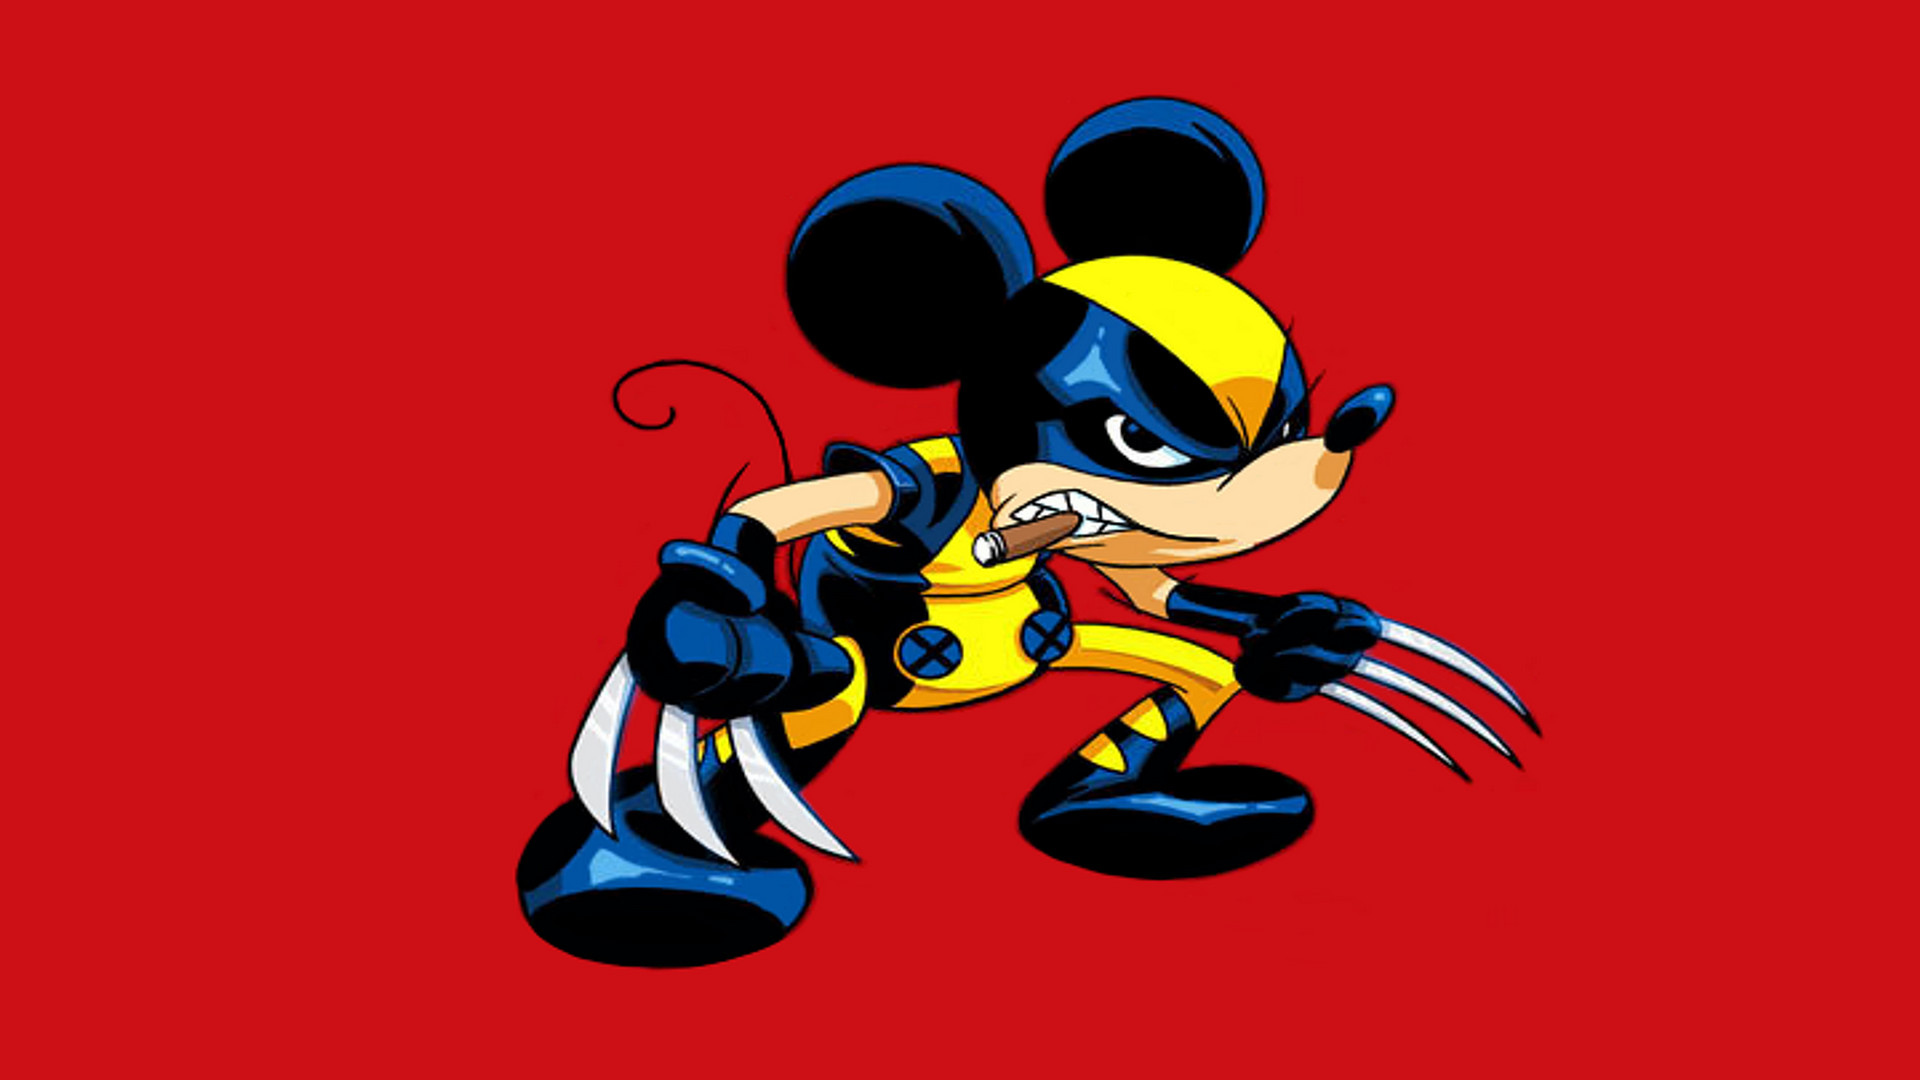 1920x1080 Mickey Mouse desktop wallpapers | Mickey Mouse wallpapers